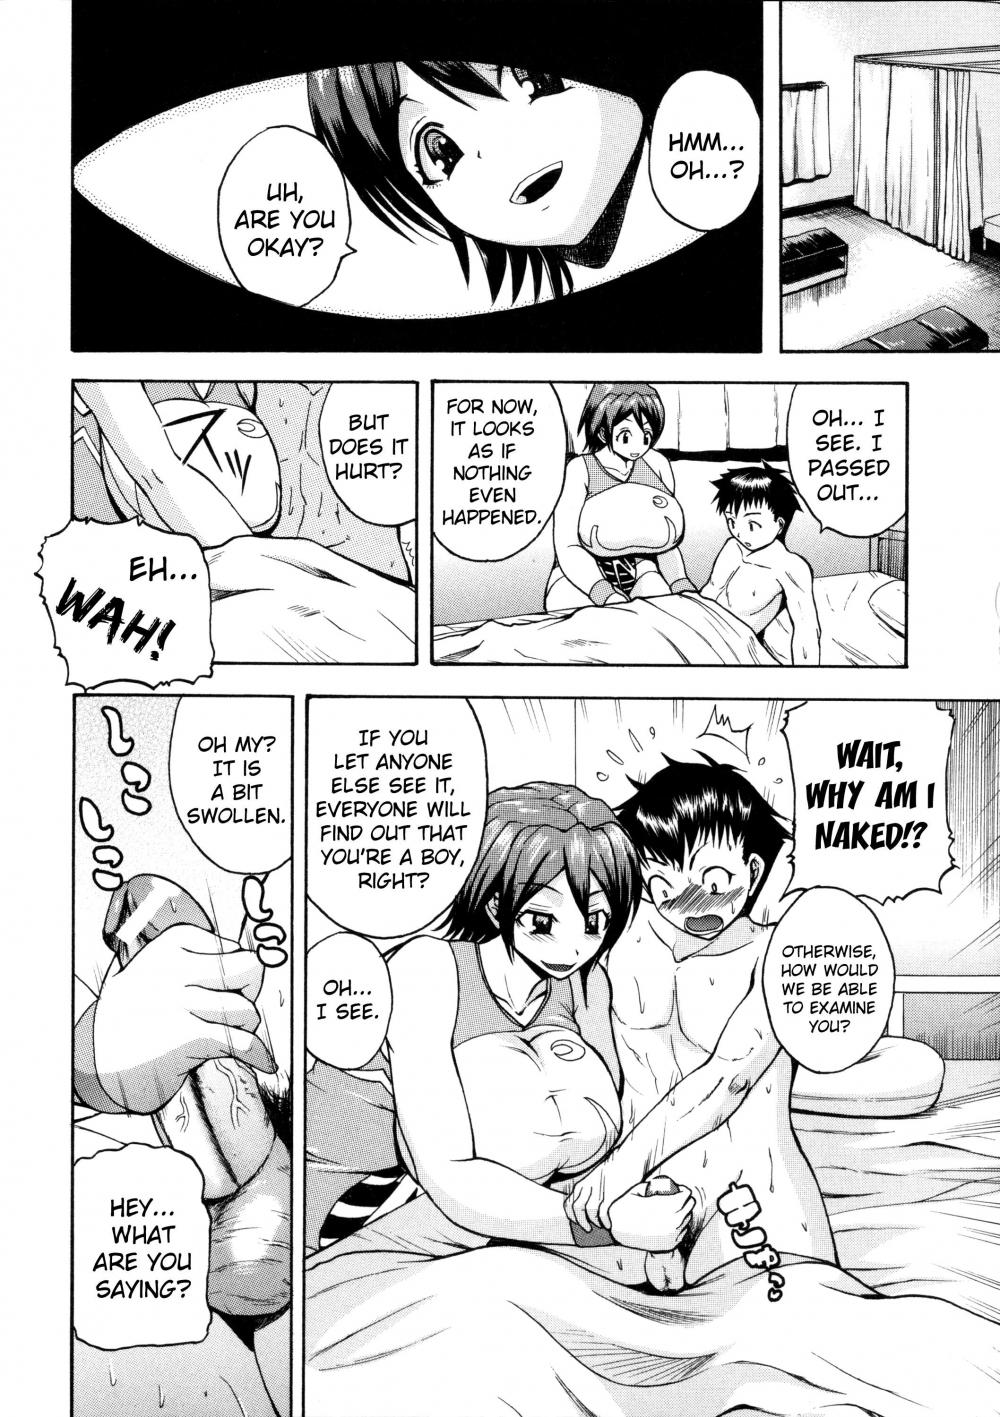 Agony Toon Porn - Faint In Agony Bodylock ~I'll Make You Cum On The Count Of 3~-Chapter  1-Hentai Manga Hentai Comic - Page: 25 - Online porn video at mobile